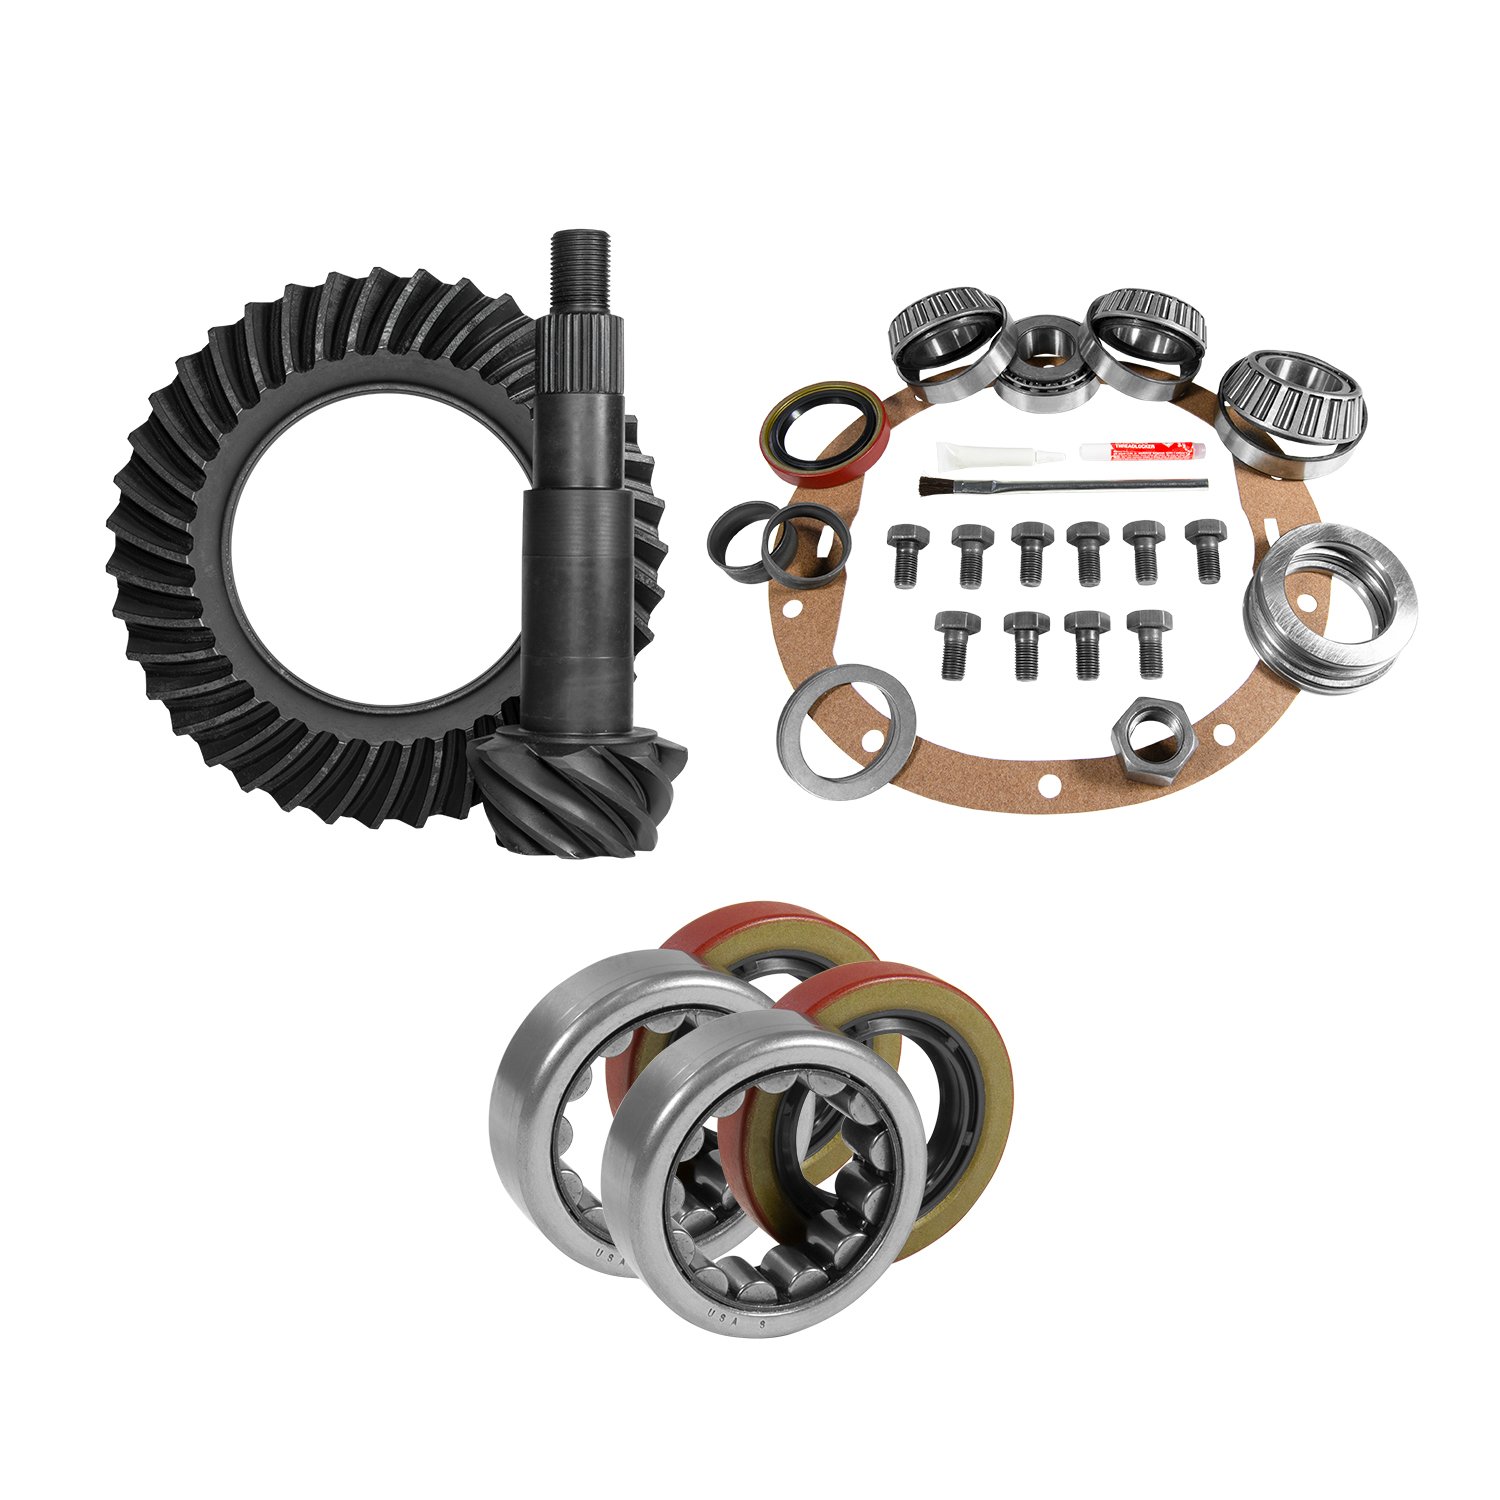 Muscle Car Re-Gear Kit For GM 8.5 in. Diff, 30 Spline, 3.08 Ratio